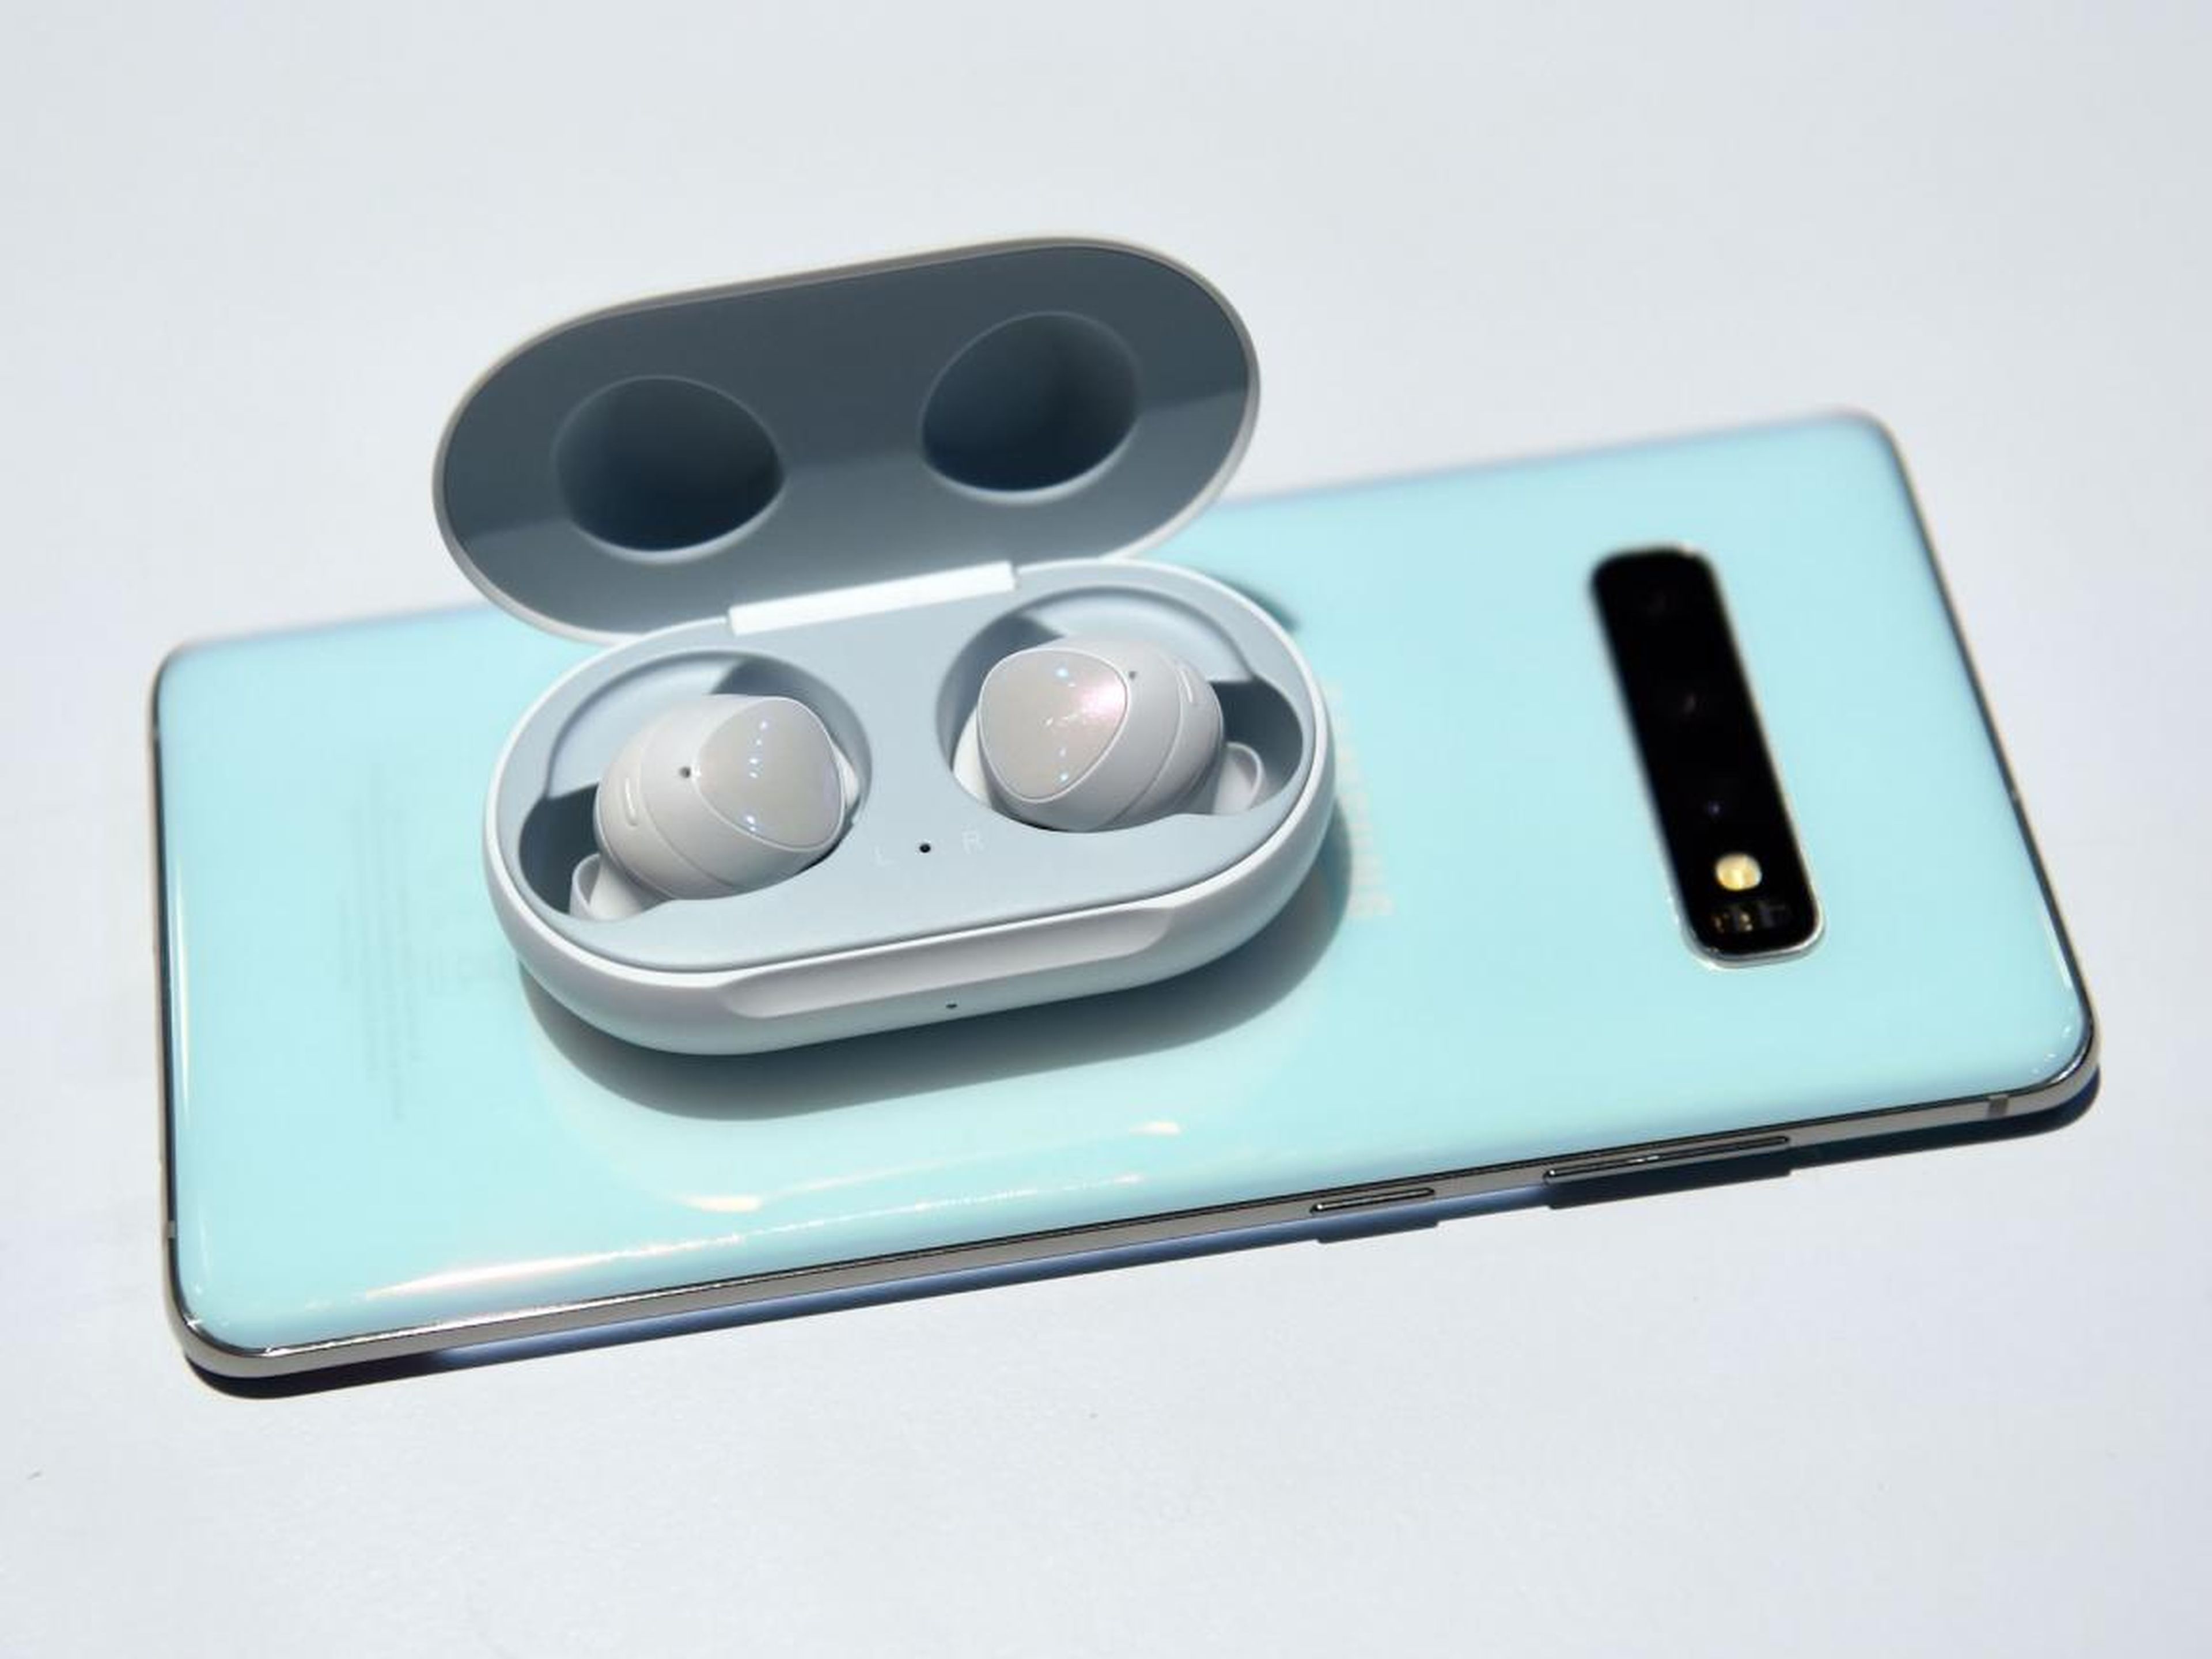 The Galaxy Buds case allows for wireless charging, and the new Galaxy S10 phone can charge other devices on the go. The original AirPods case doesn't have wireless charging.